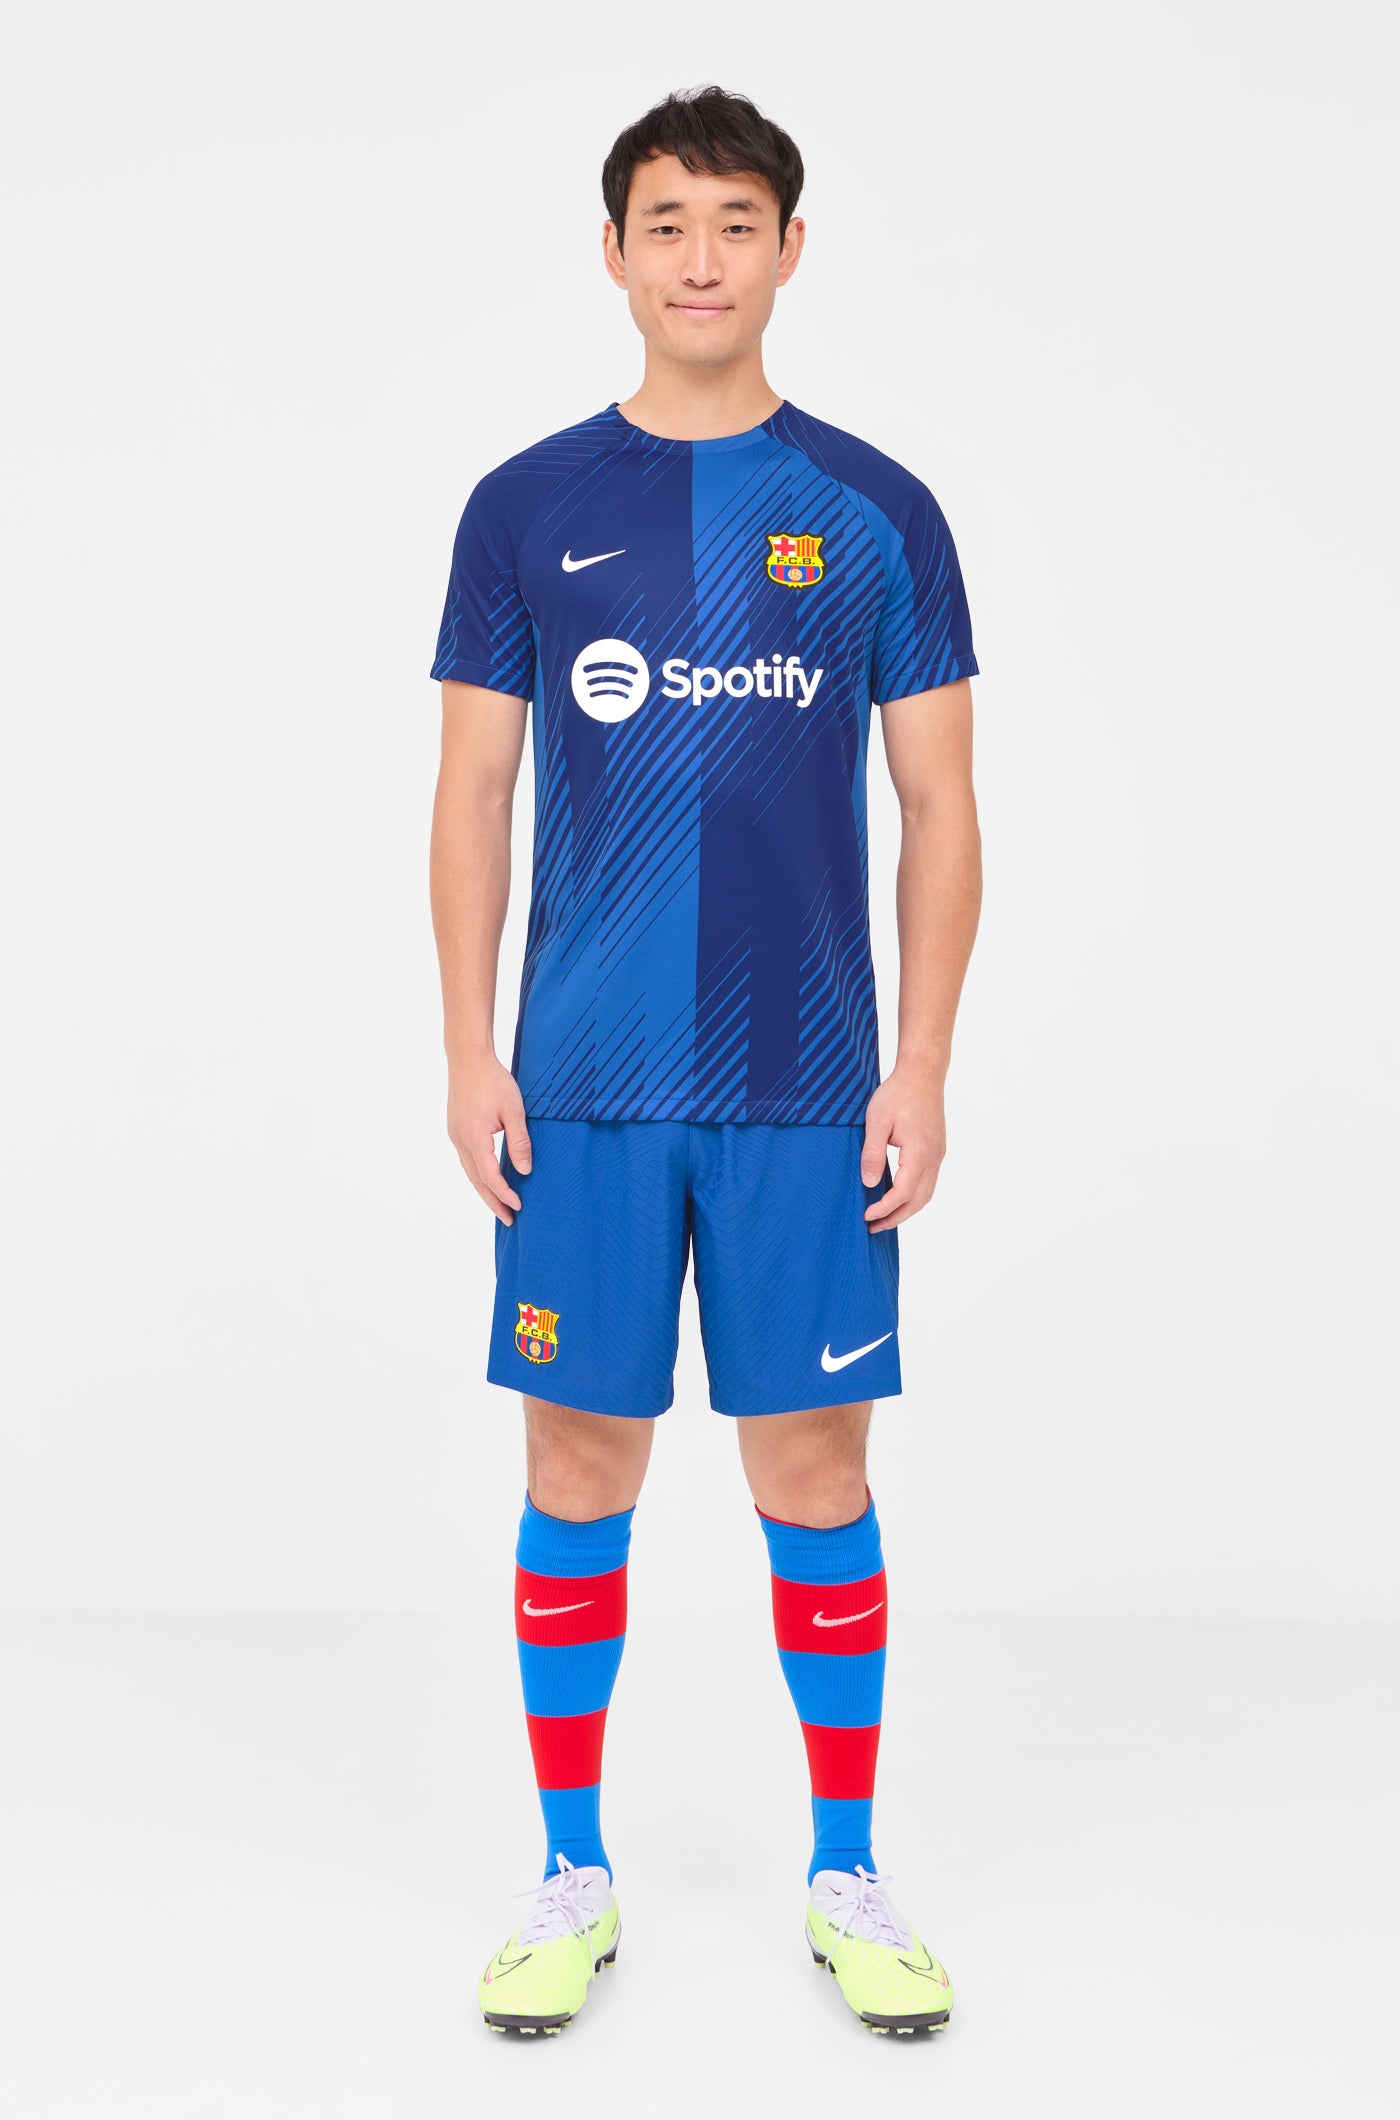 Unique FC Barcelona 23-24 Pre-Match Shirt Released - Footy Headlines